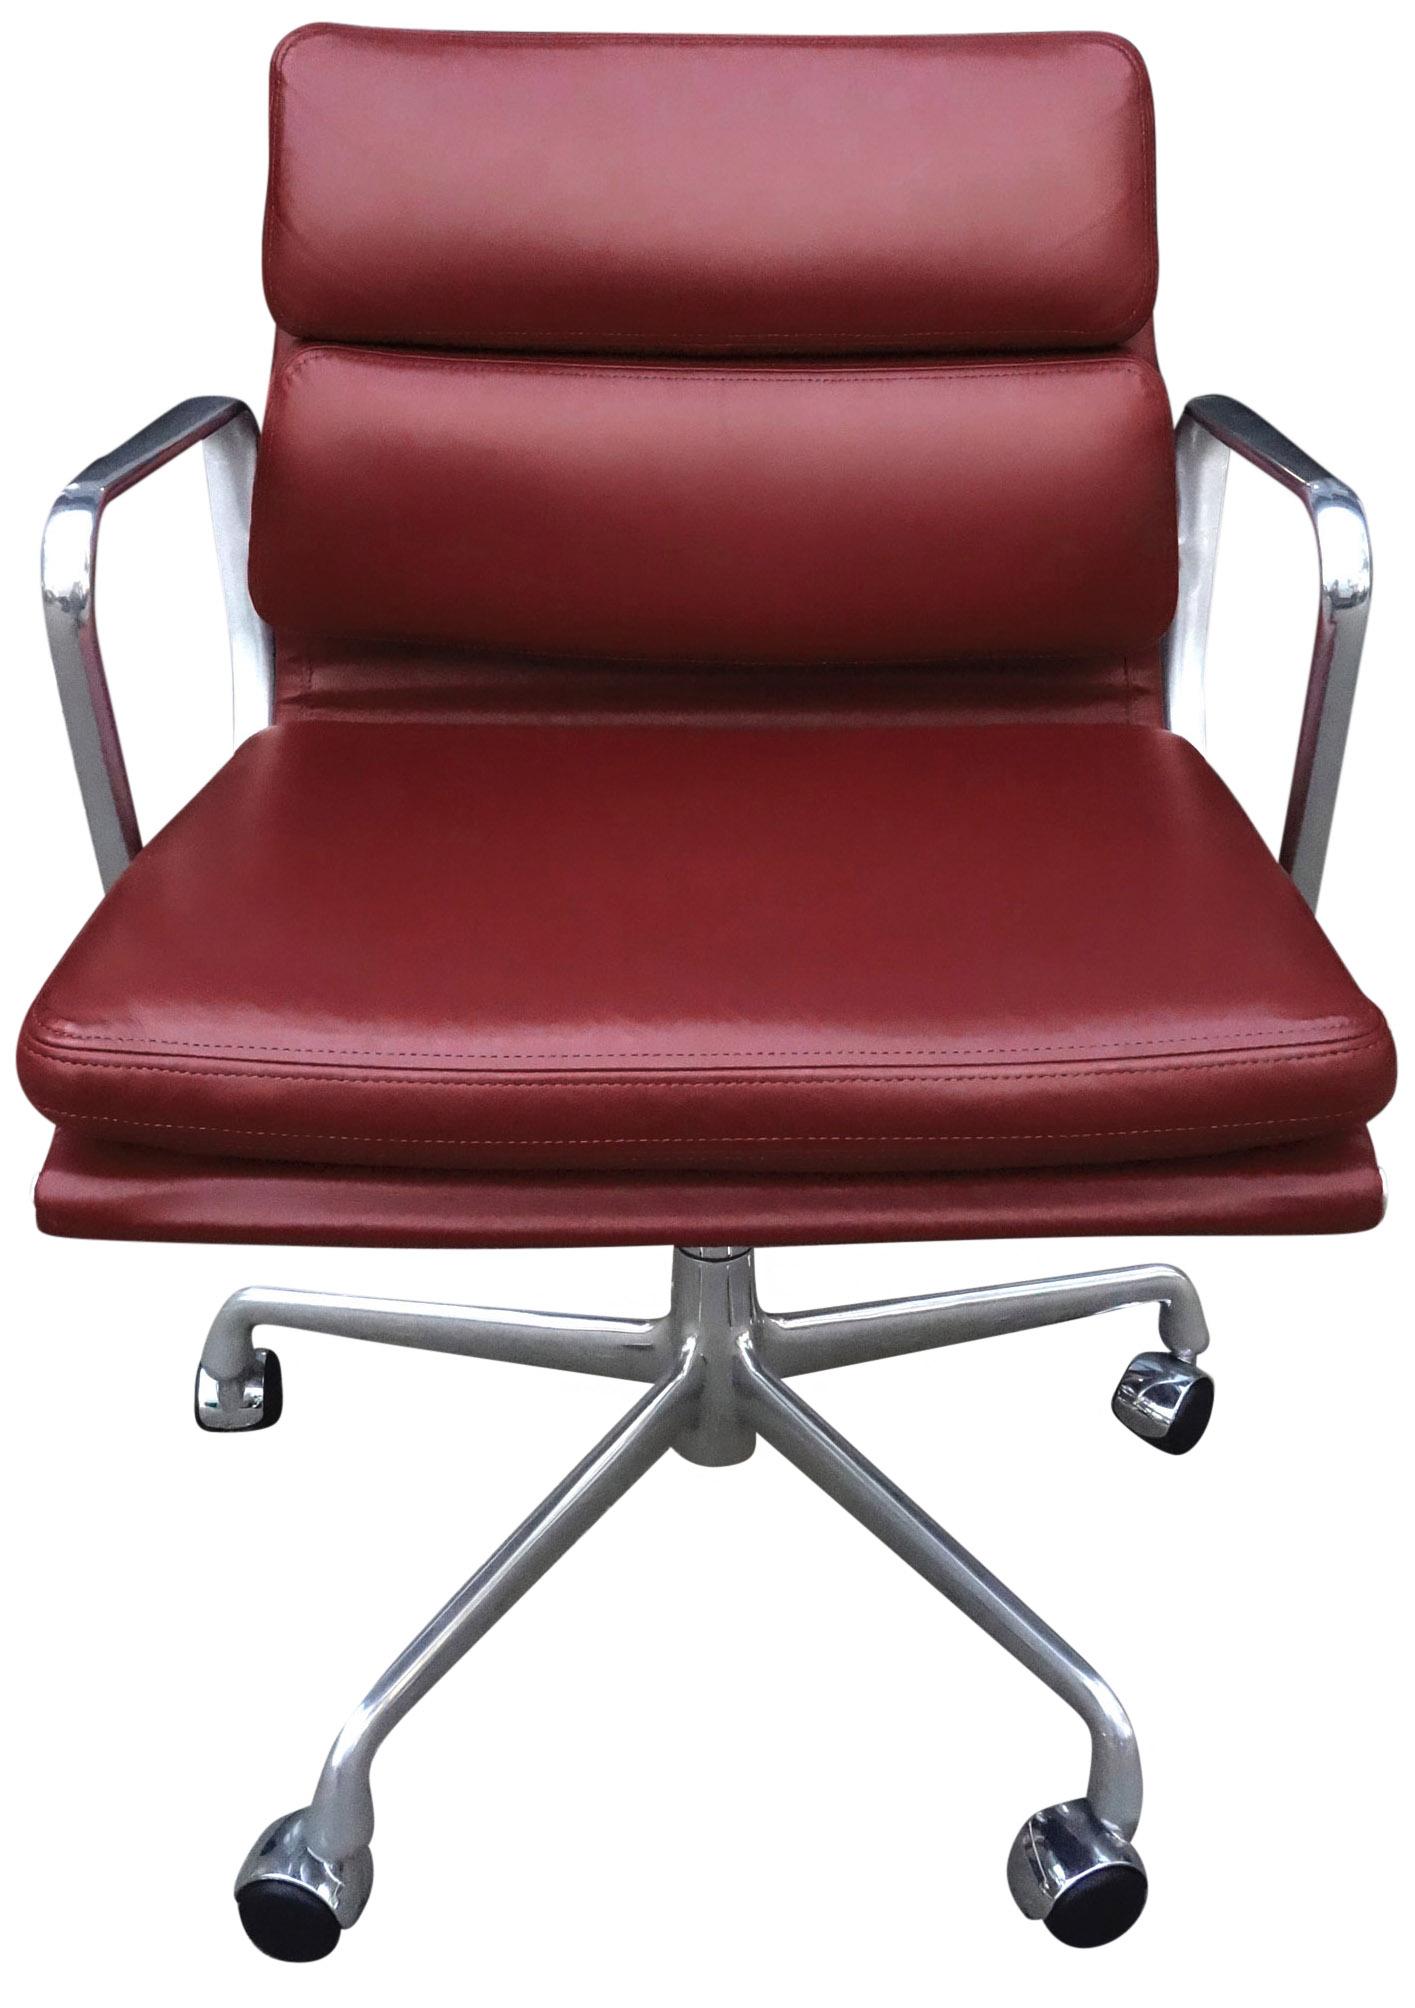 For your consideration at up to six Eames for Herman Miller vintage soft pad chairs in Burgundy leather with low backs. Adjustable tilt and height. 

These authentic vintage examples are icons of Mid-Century Modern design. The chairs part of the